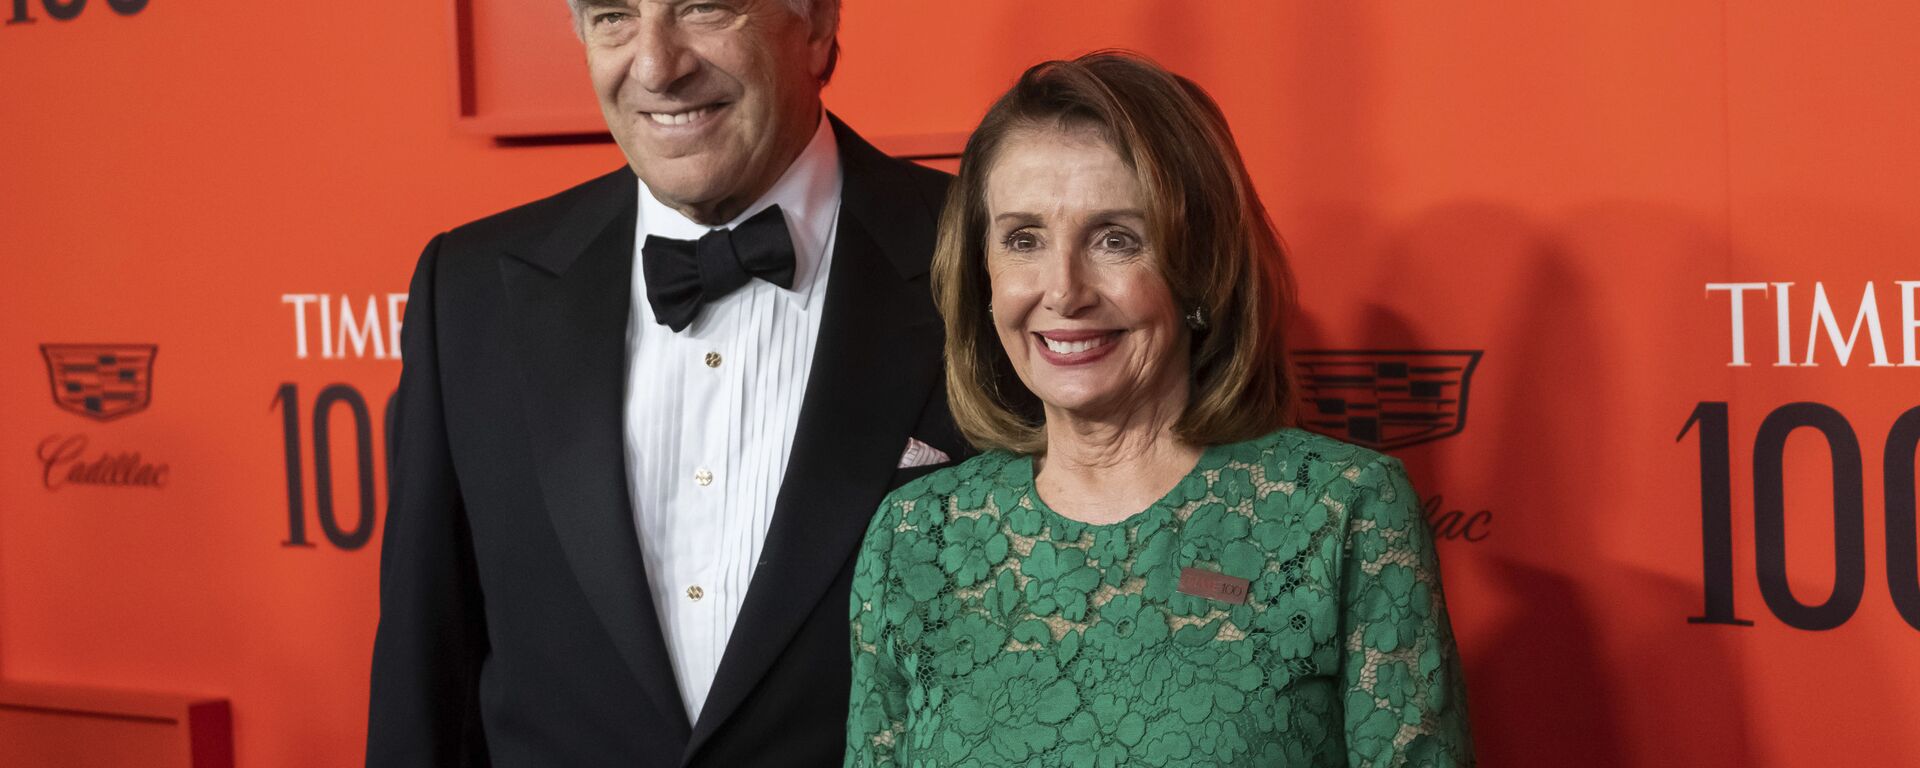 Paul Pelosi and Nancy Pelosi attend the 2019 Time 100 Gala, celebrating the 100 most influential people in the world, at Frederick P. Rose Hall, Jazz at Lincoln Center on Tuesday, April 23, 2019, in New York - Sputnik International, 1920, 17.07.2022